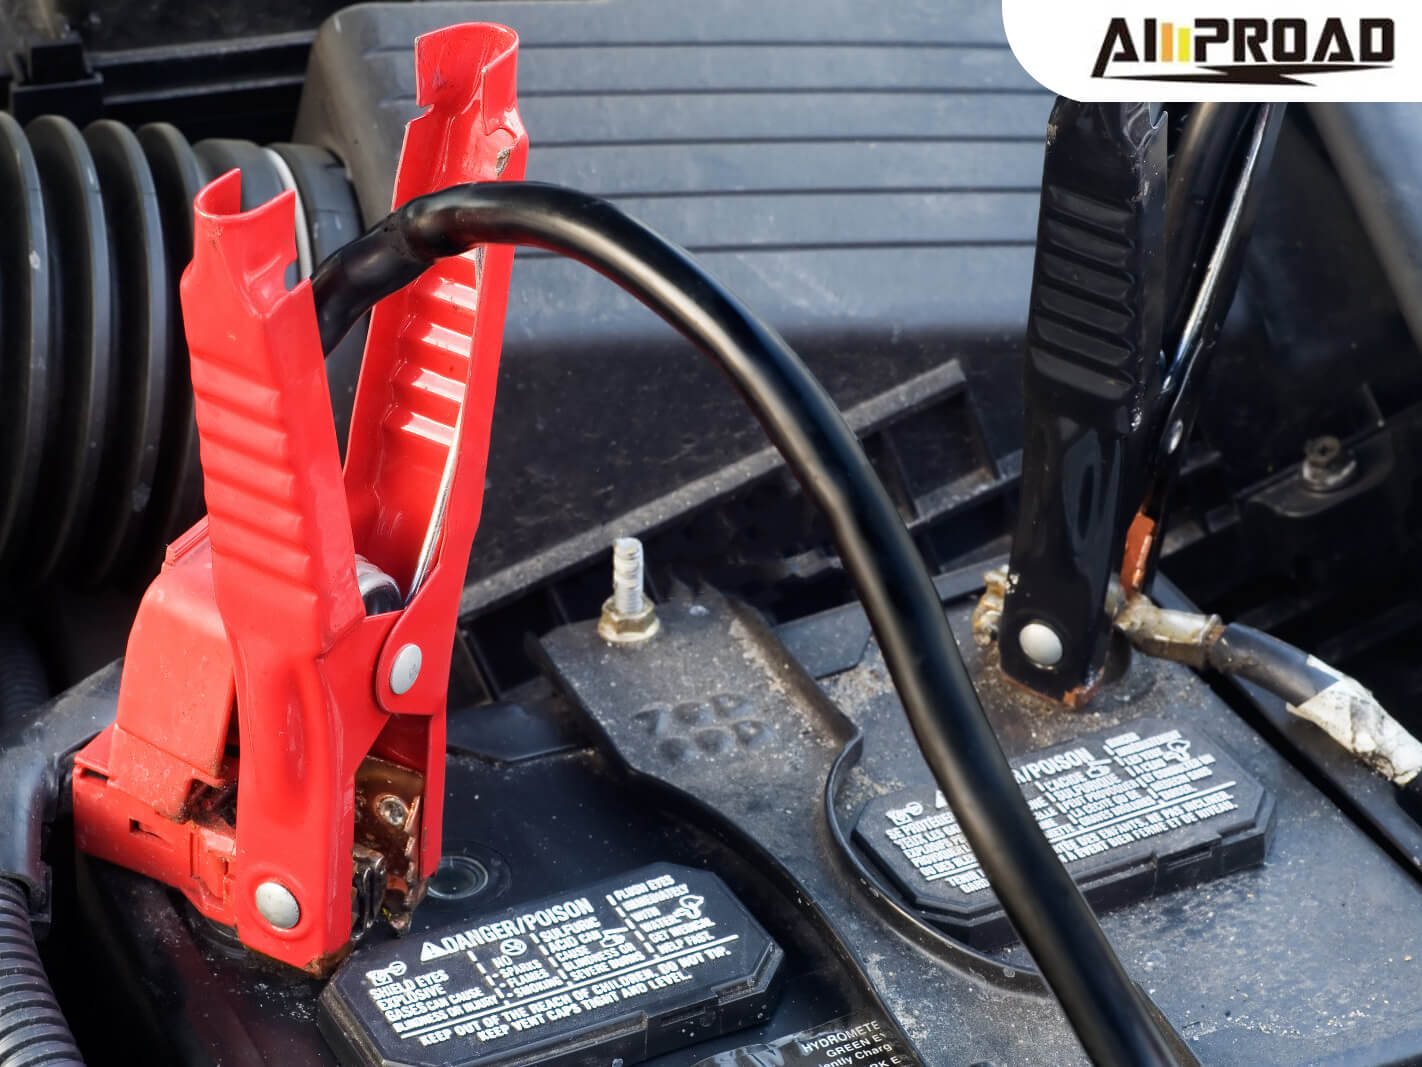 Can You leave a portable jump starter in Your vehicle?